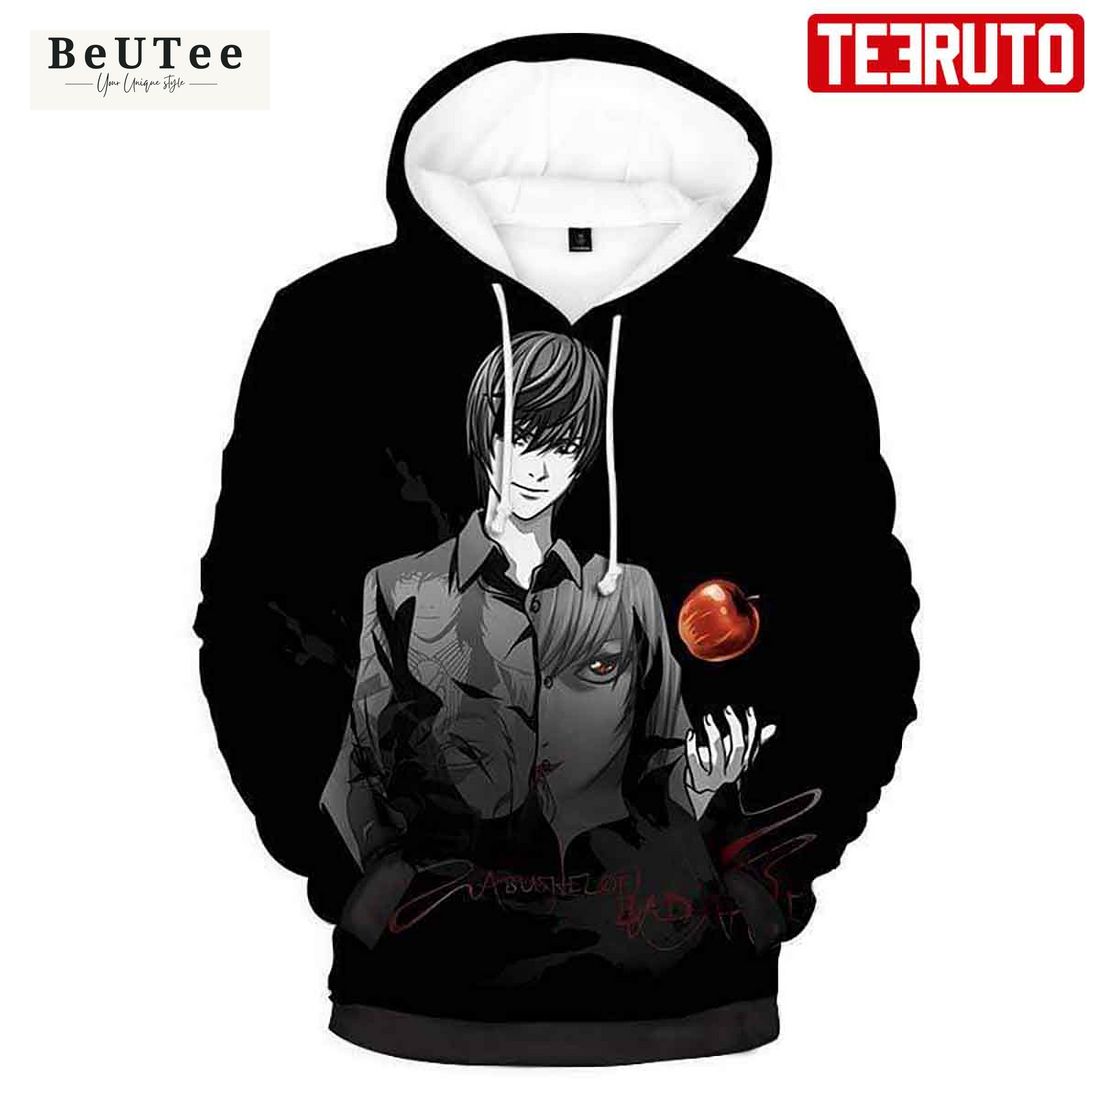 light and darkness light yagami abyss edition death note hd 3d aop hoodie 1 Iu5KG